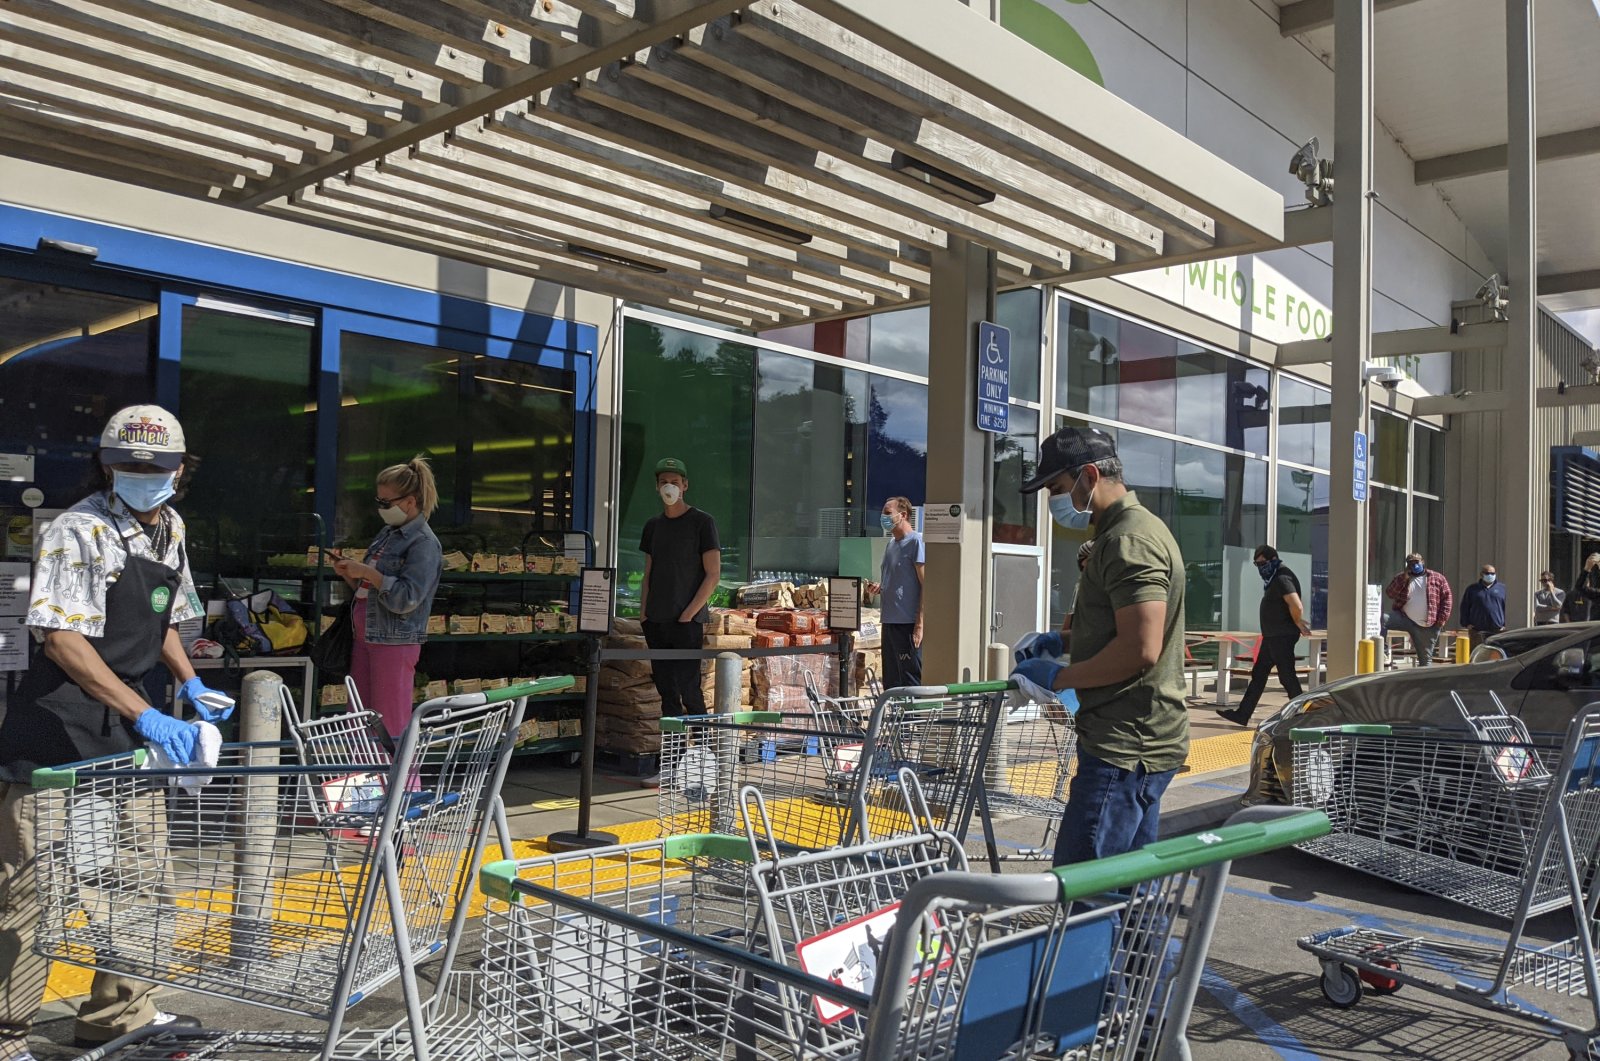 Whole Foods Market 365 supermarket workers wear masks and gloves as they sanitize shopping carts, while shoppers wait in line to enter the store, observing social distancing during the coronavirus pandemic, Los Angeles, the U.S., April 17, 2020. (AP File Photo)